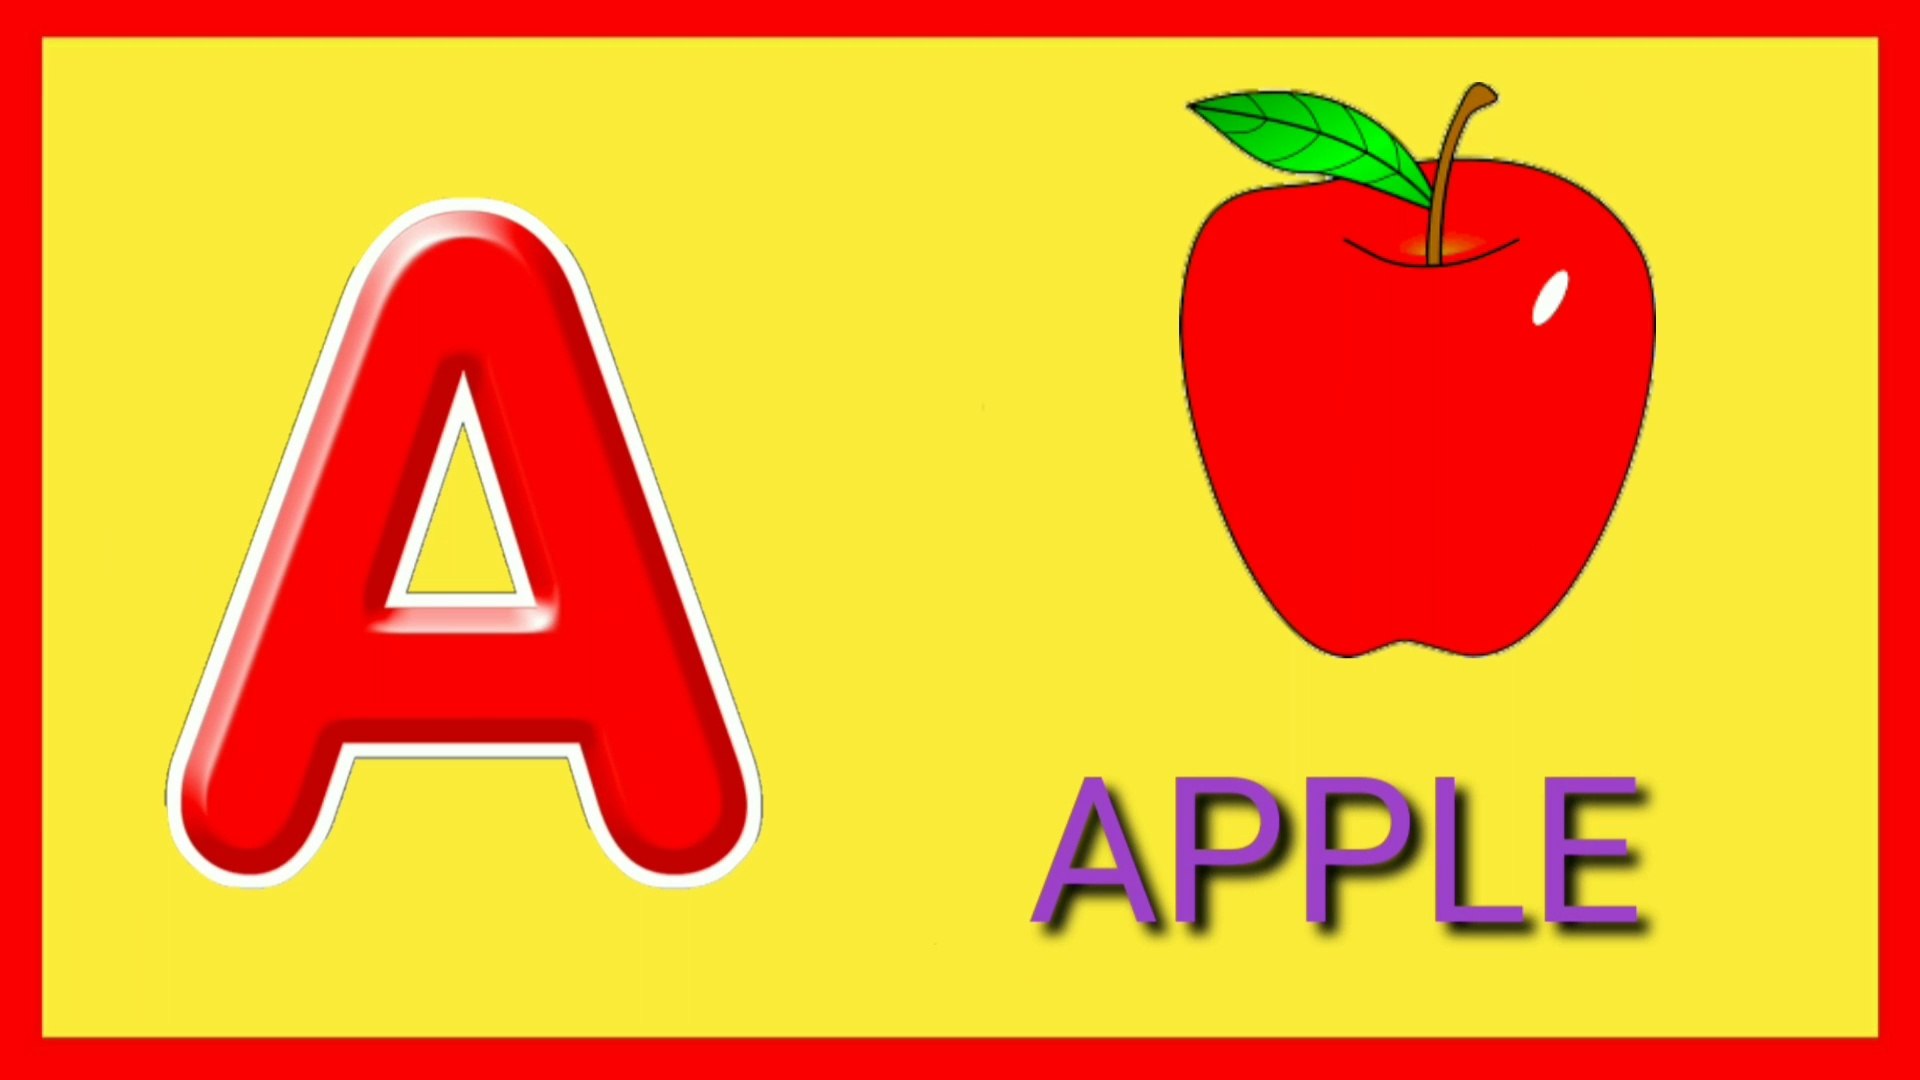 A For Apple B For Ball Abcd Phonics Song For Kids A For Apple B For Ball Abcd English Alphabet Song Video Dailymotion